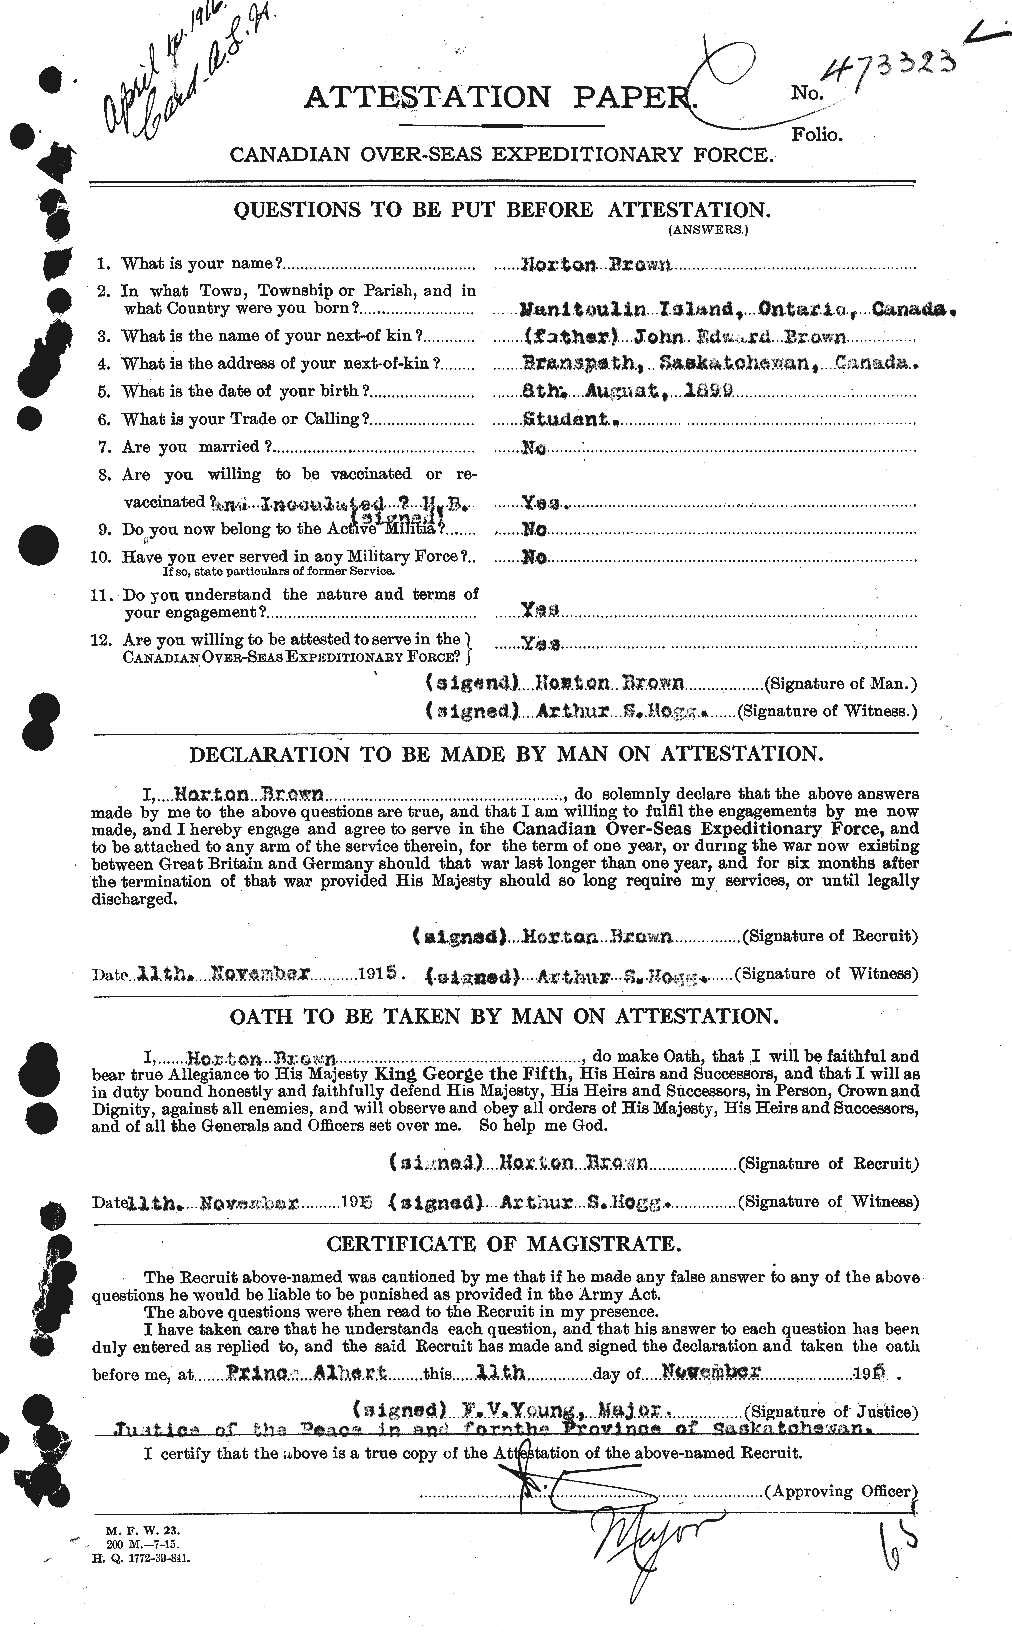 Personnel Records of the First World War - CEF 265612a